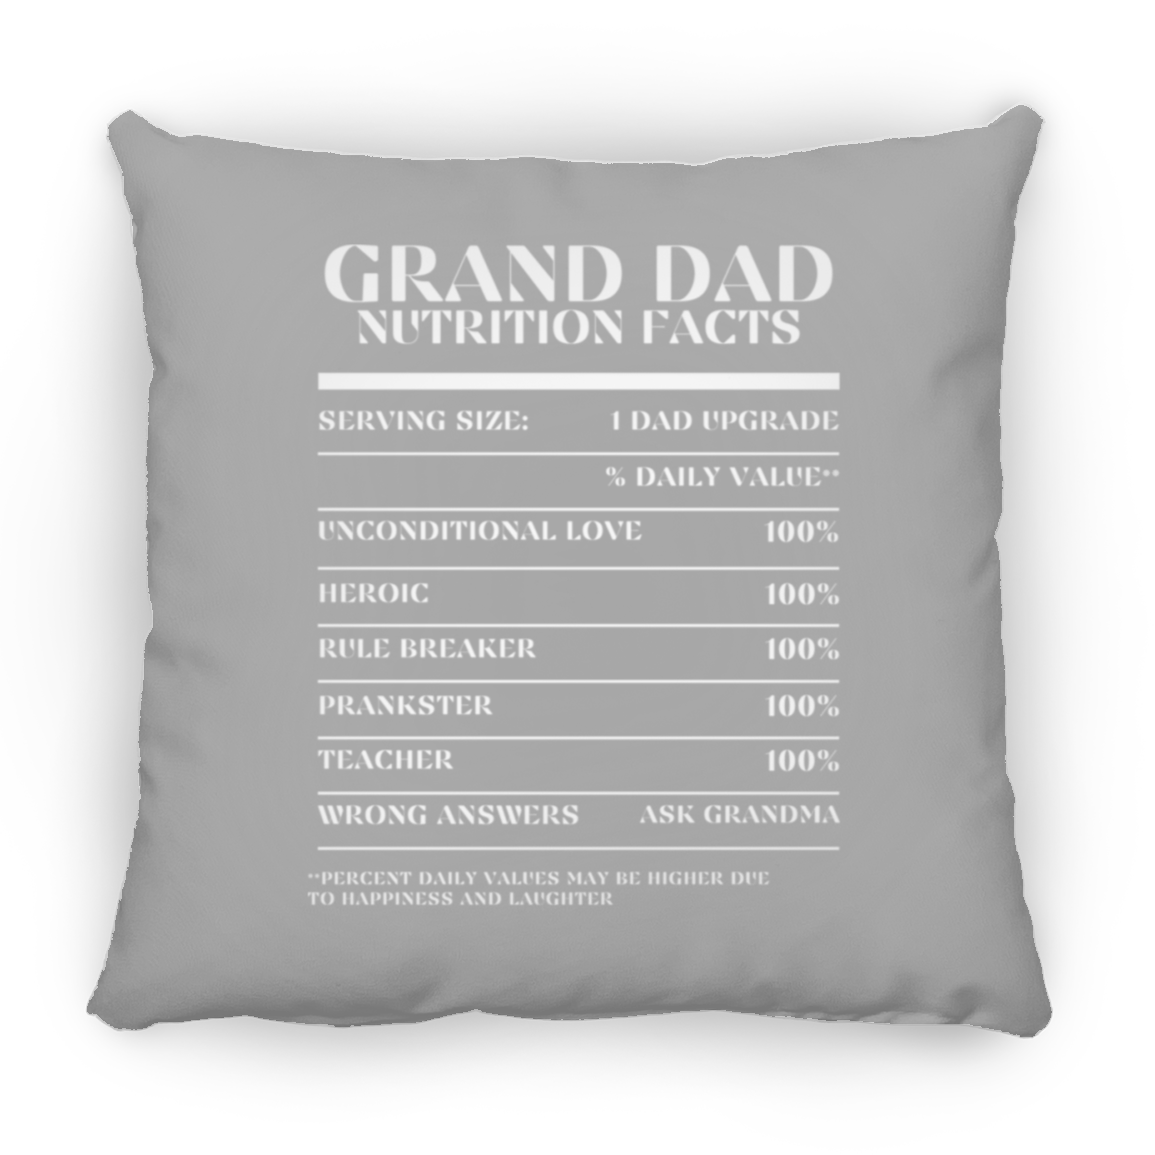 Nutrition Facts Pillow - Grand Dad - White